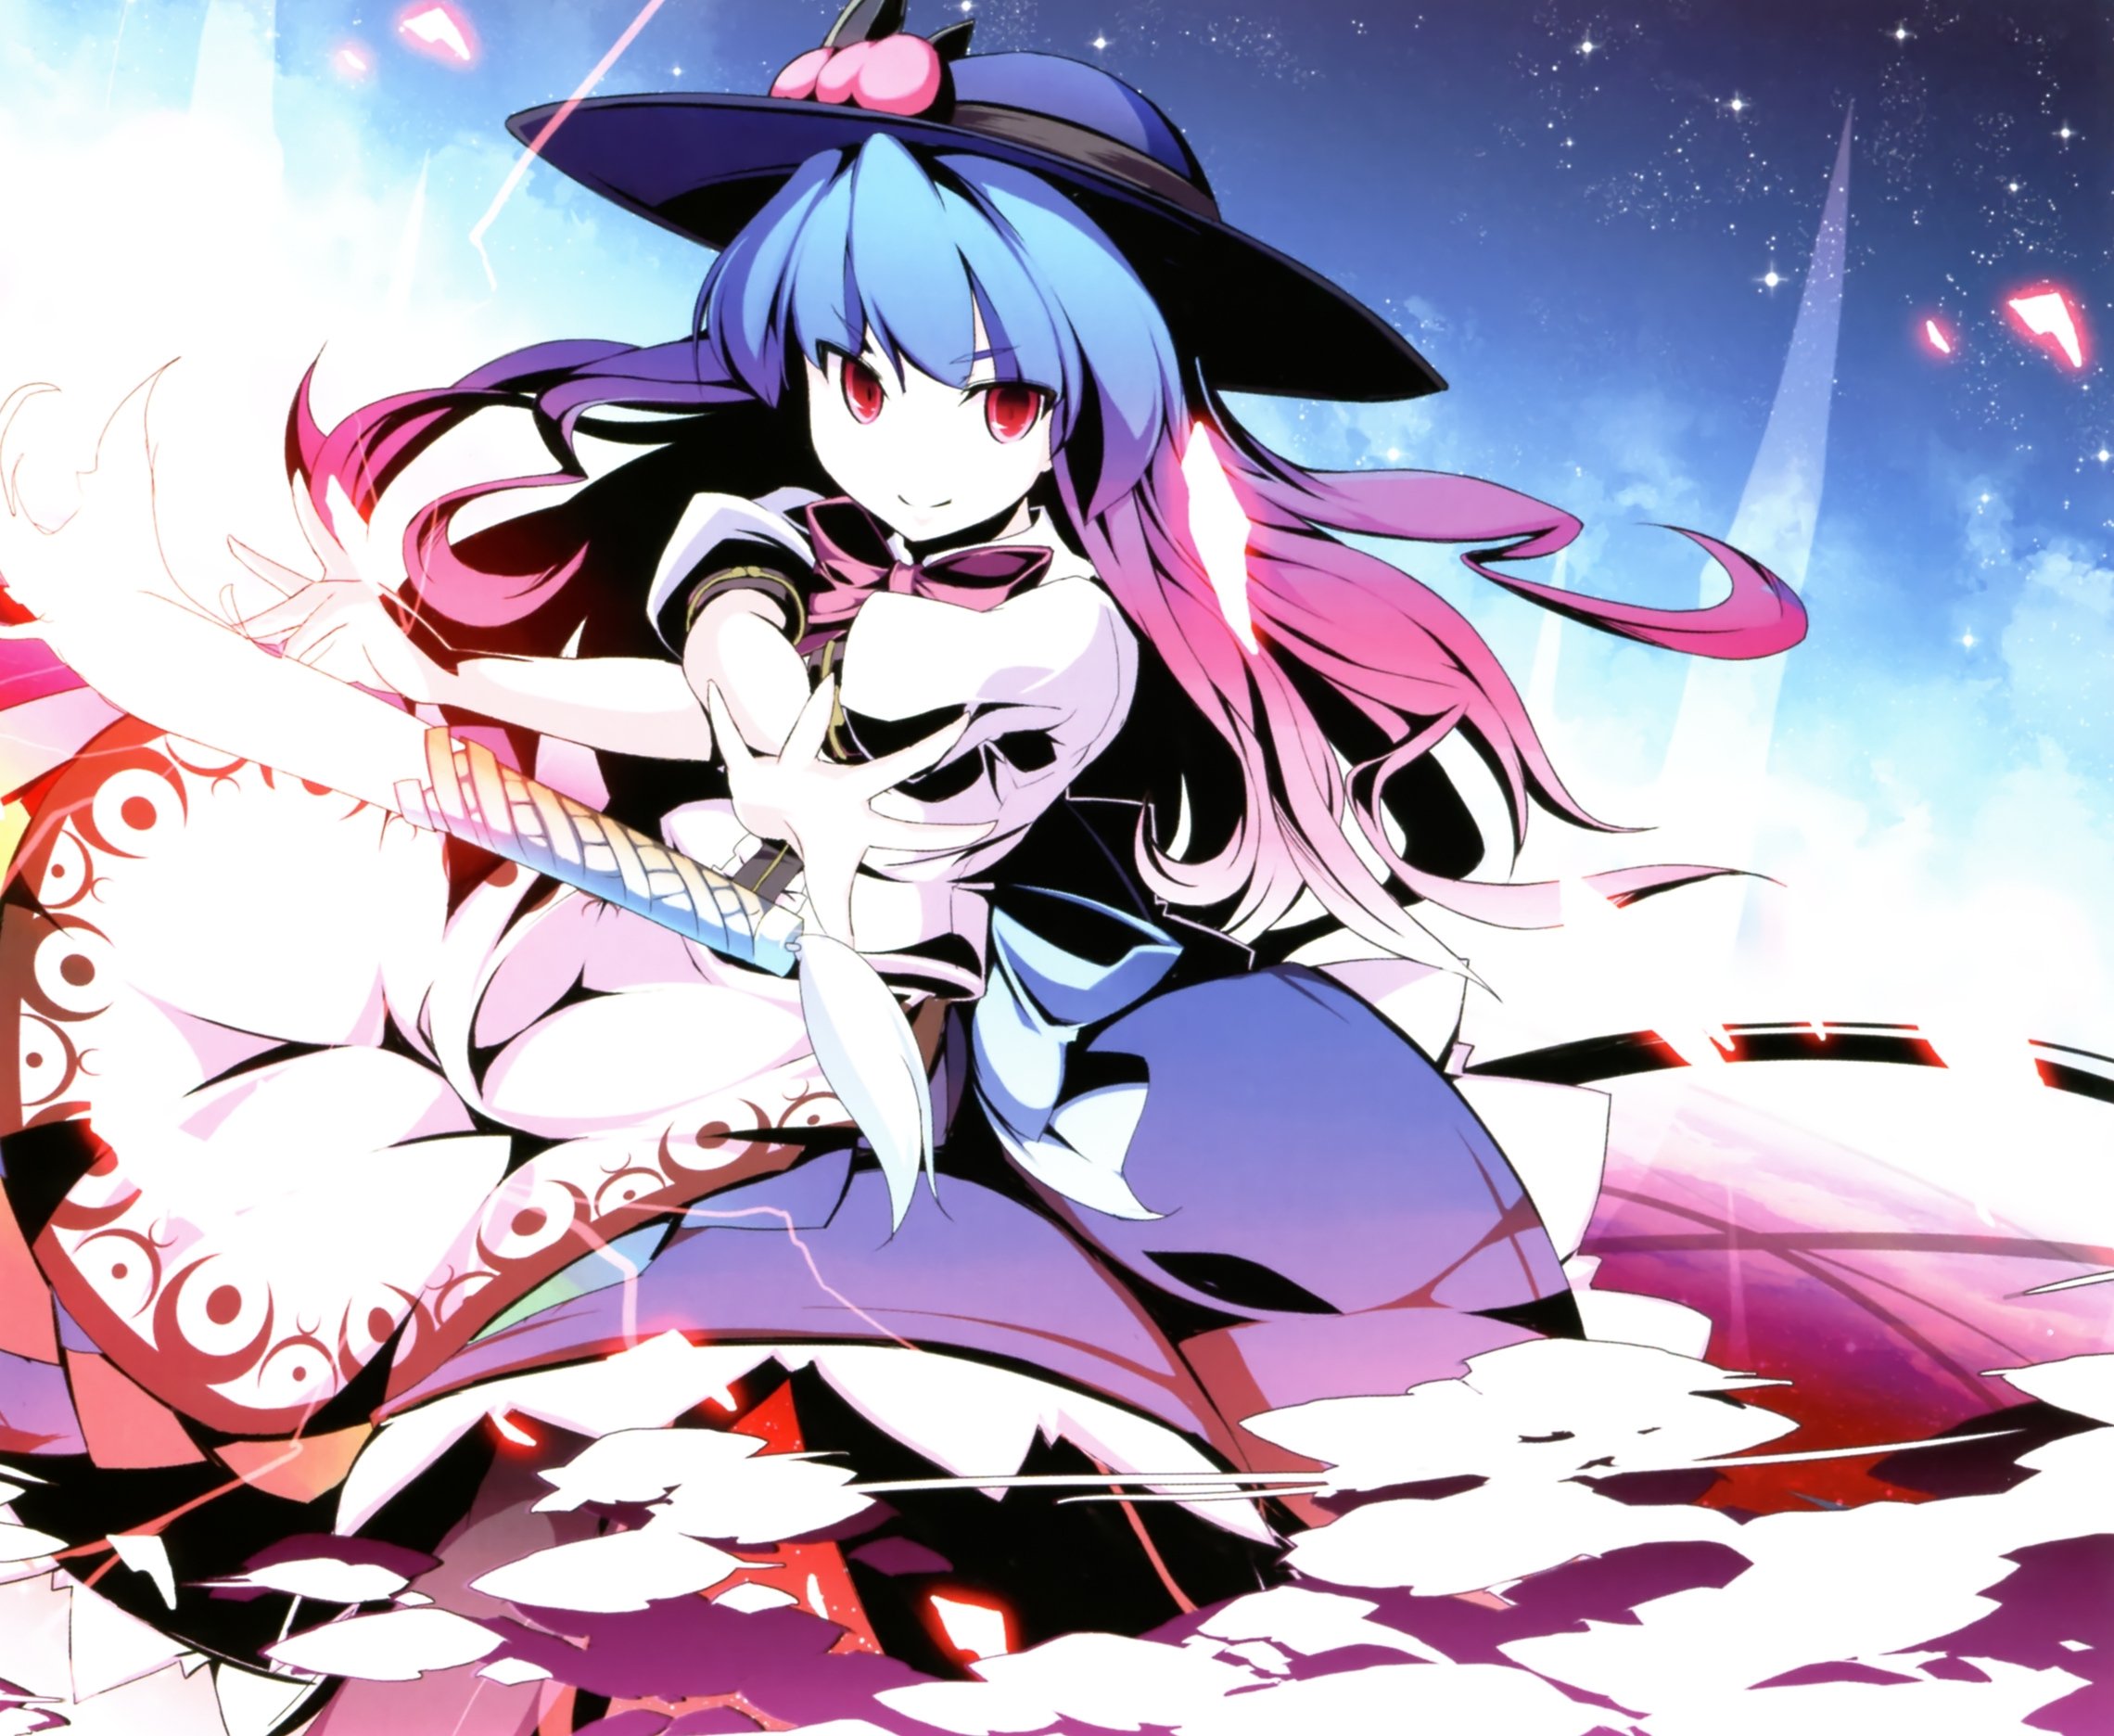 video, Games, Touhou, Dress, Stars, Fruits, Long, Hair, Weapons, Peach, Blue, Hair, Pink, Hair, Red, Eyes, Bows, Vortex, Aprons, Hinanawi, Tenshi, Skyscapes, Hats, Magical, Sword, Of, Hisou, Swords, Bicolored, H Wallpaper